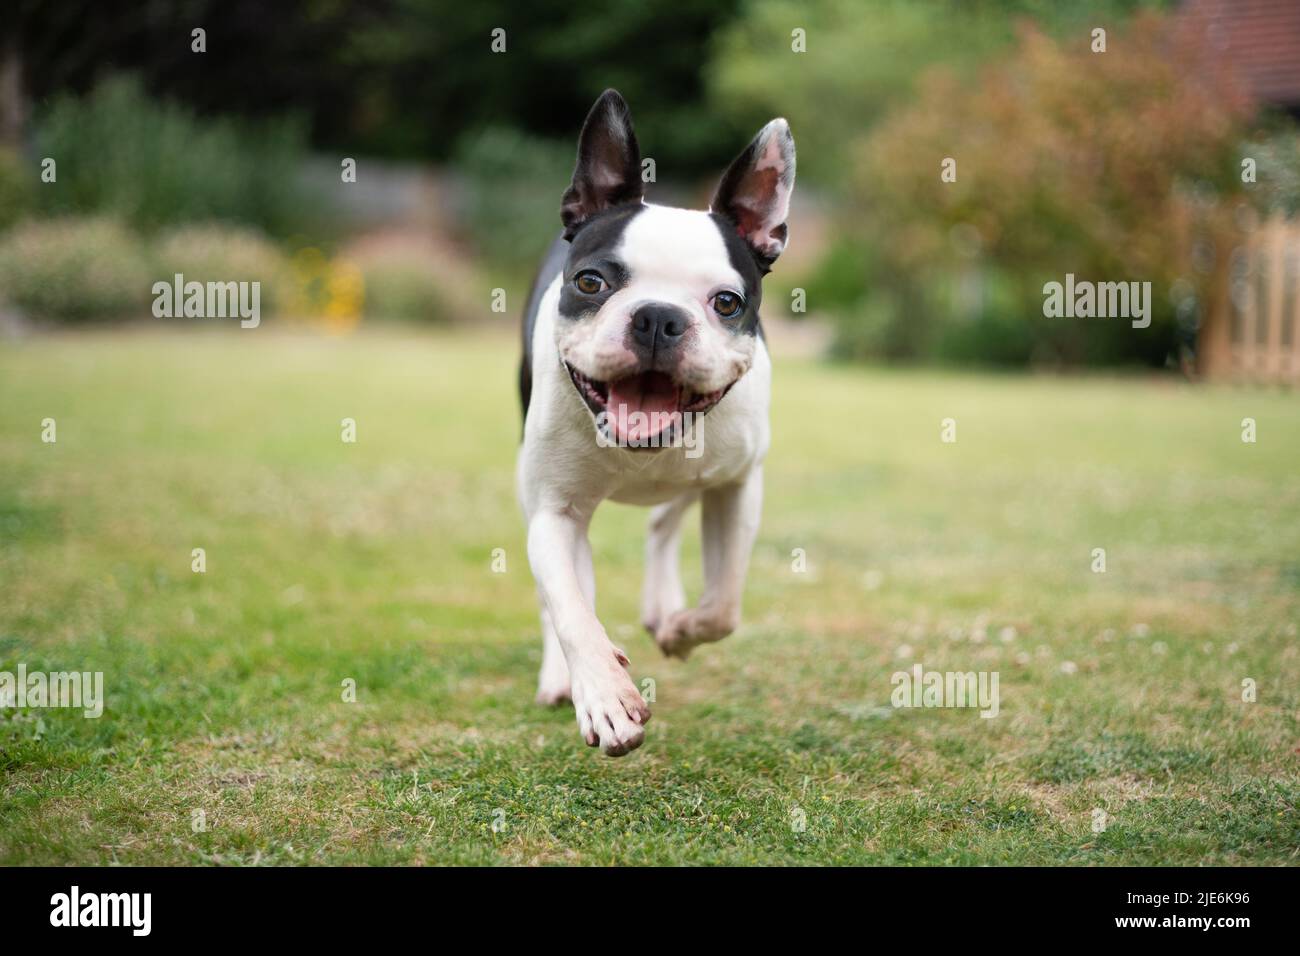 Boston Terrier dog running in a garden towards the camera at eye level. Shallow focus on her eyes. She looks very happy. Stock Photo